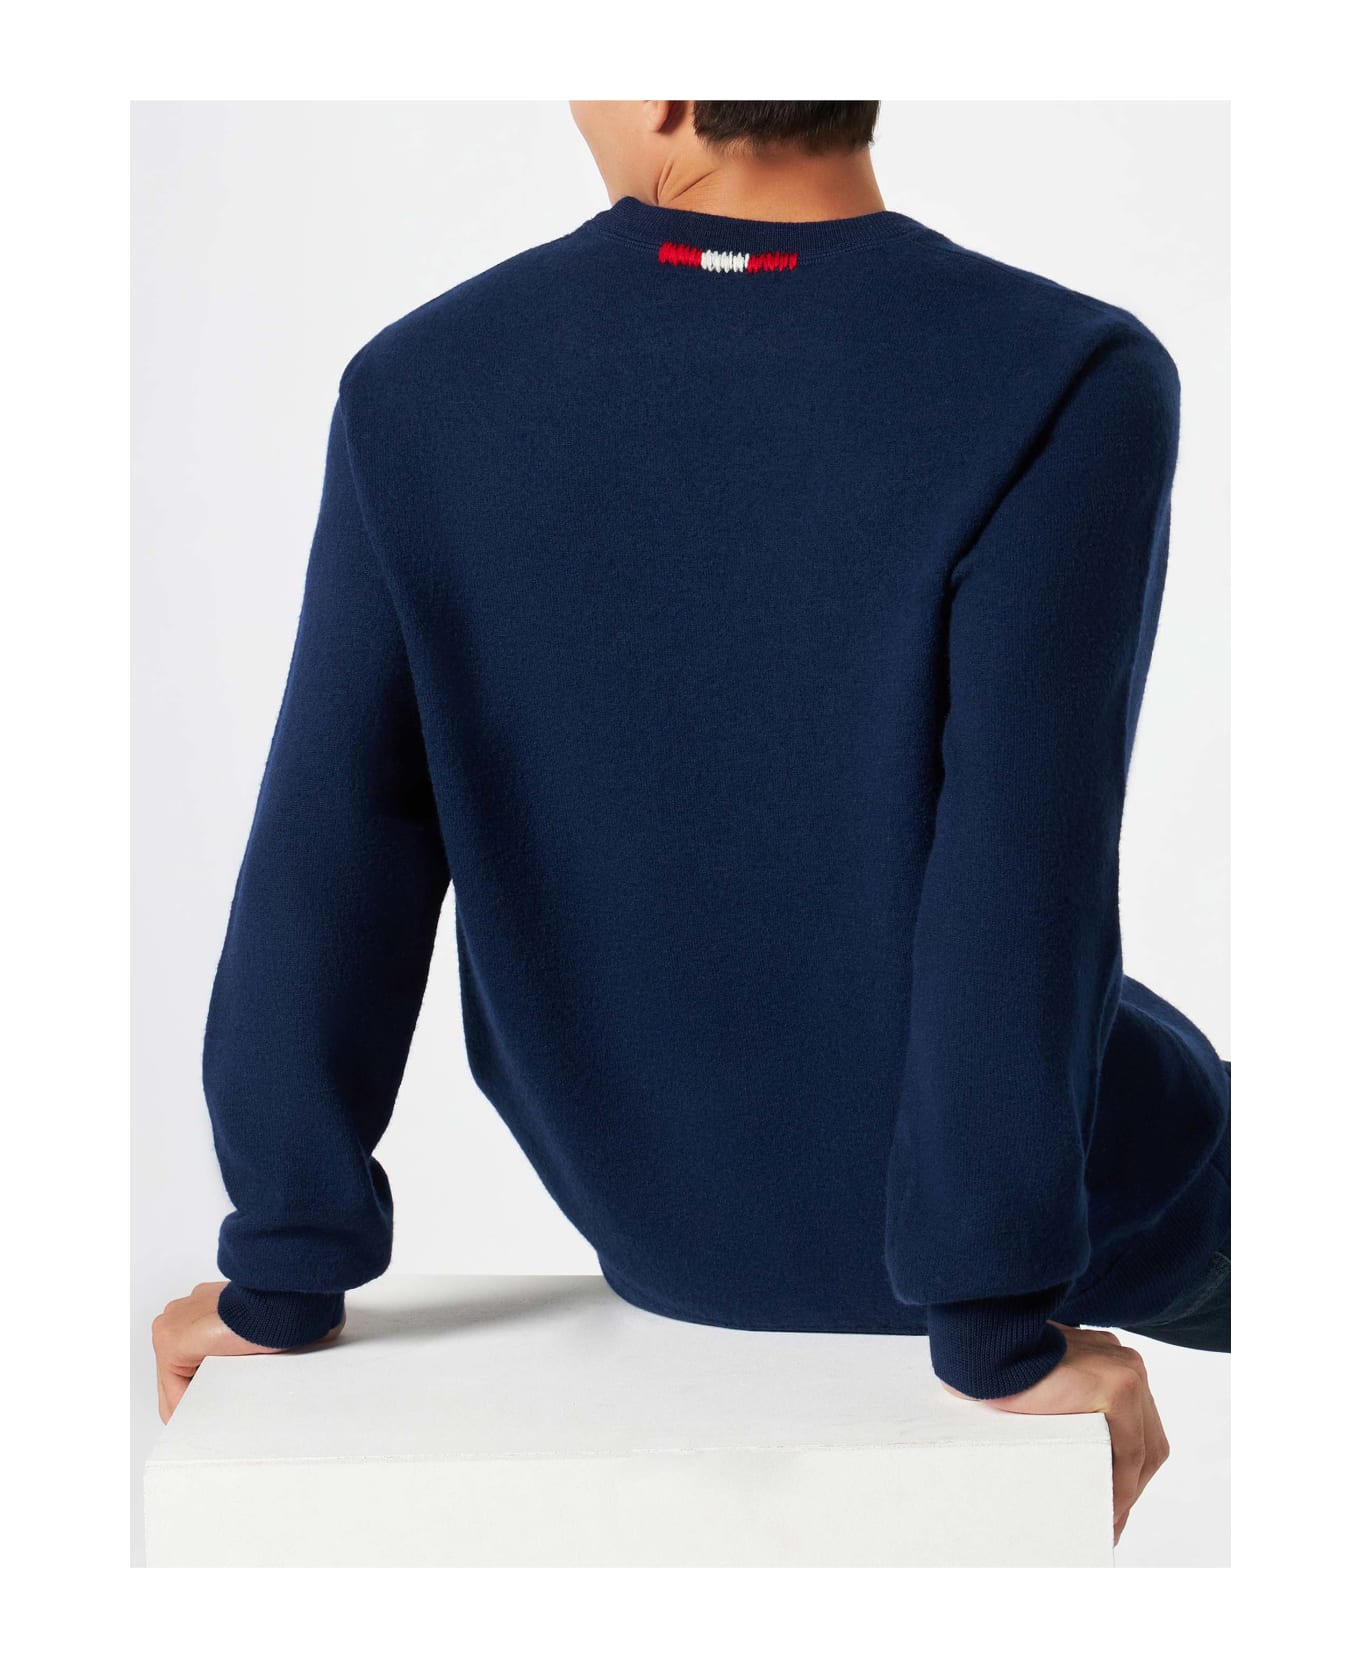 MC2 Saint Barth Man Crewneck Knitted Sweater With Day Off Embroidery - BLUE